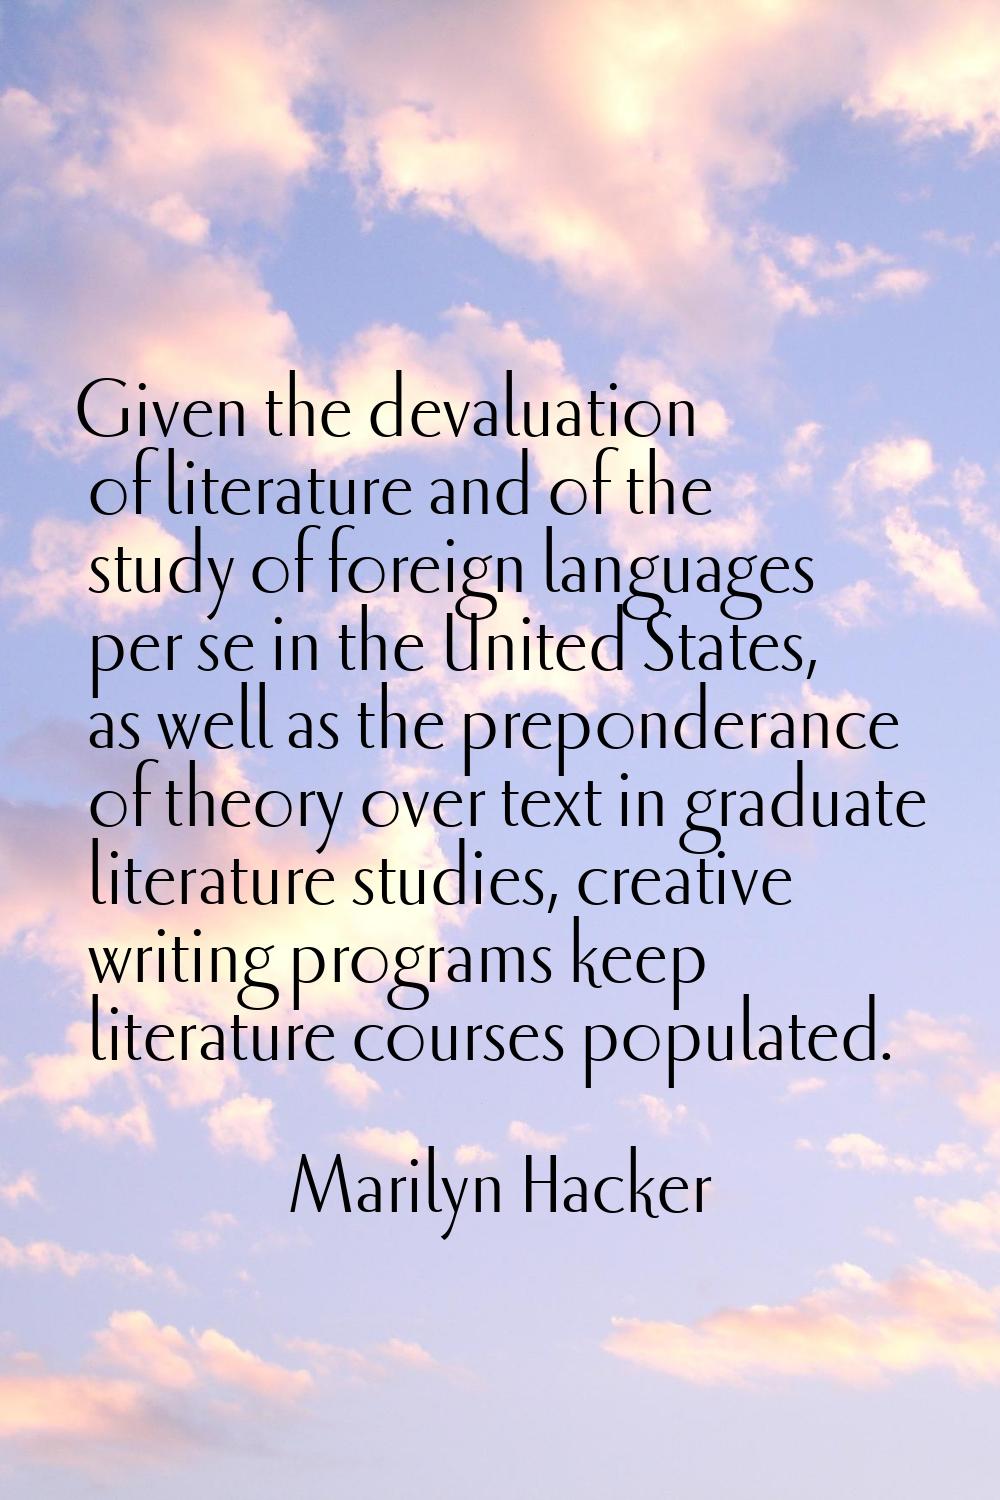 Given the devaluation of literature and of the study of foreign languages per se in the United Stat